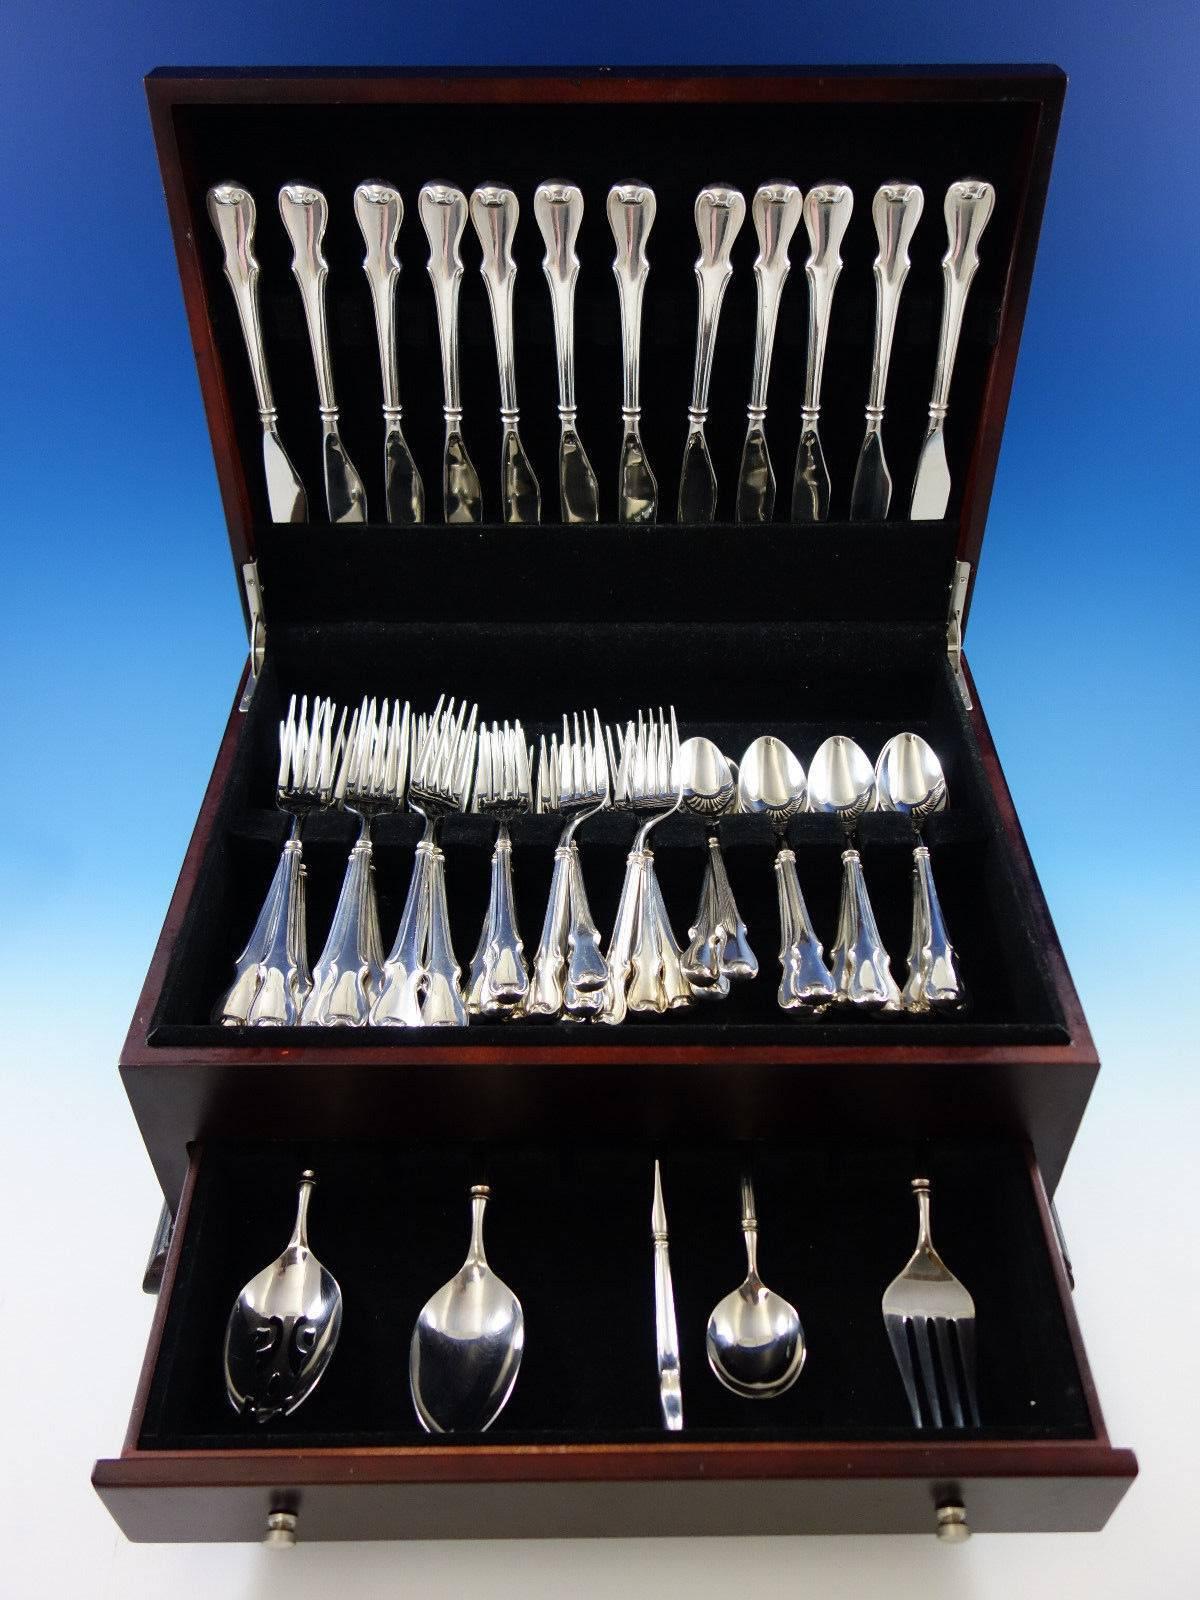 Plymouth Colony by Wallace sterling silver with stainless flatware set, 53 pieces. All of the pieces in this pattern have a hollow sterling handle and stainless implement. This set includes: 12 knives, 8 3/4